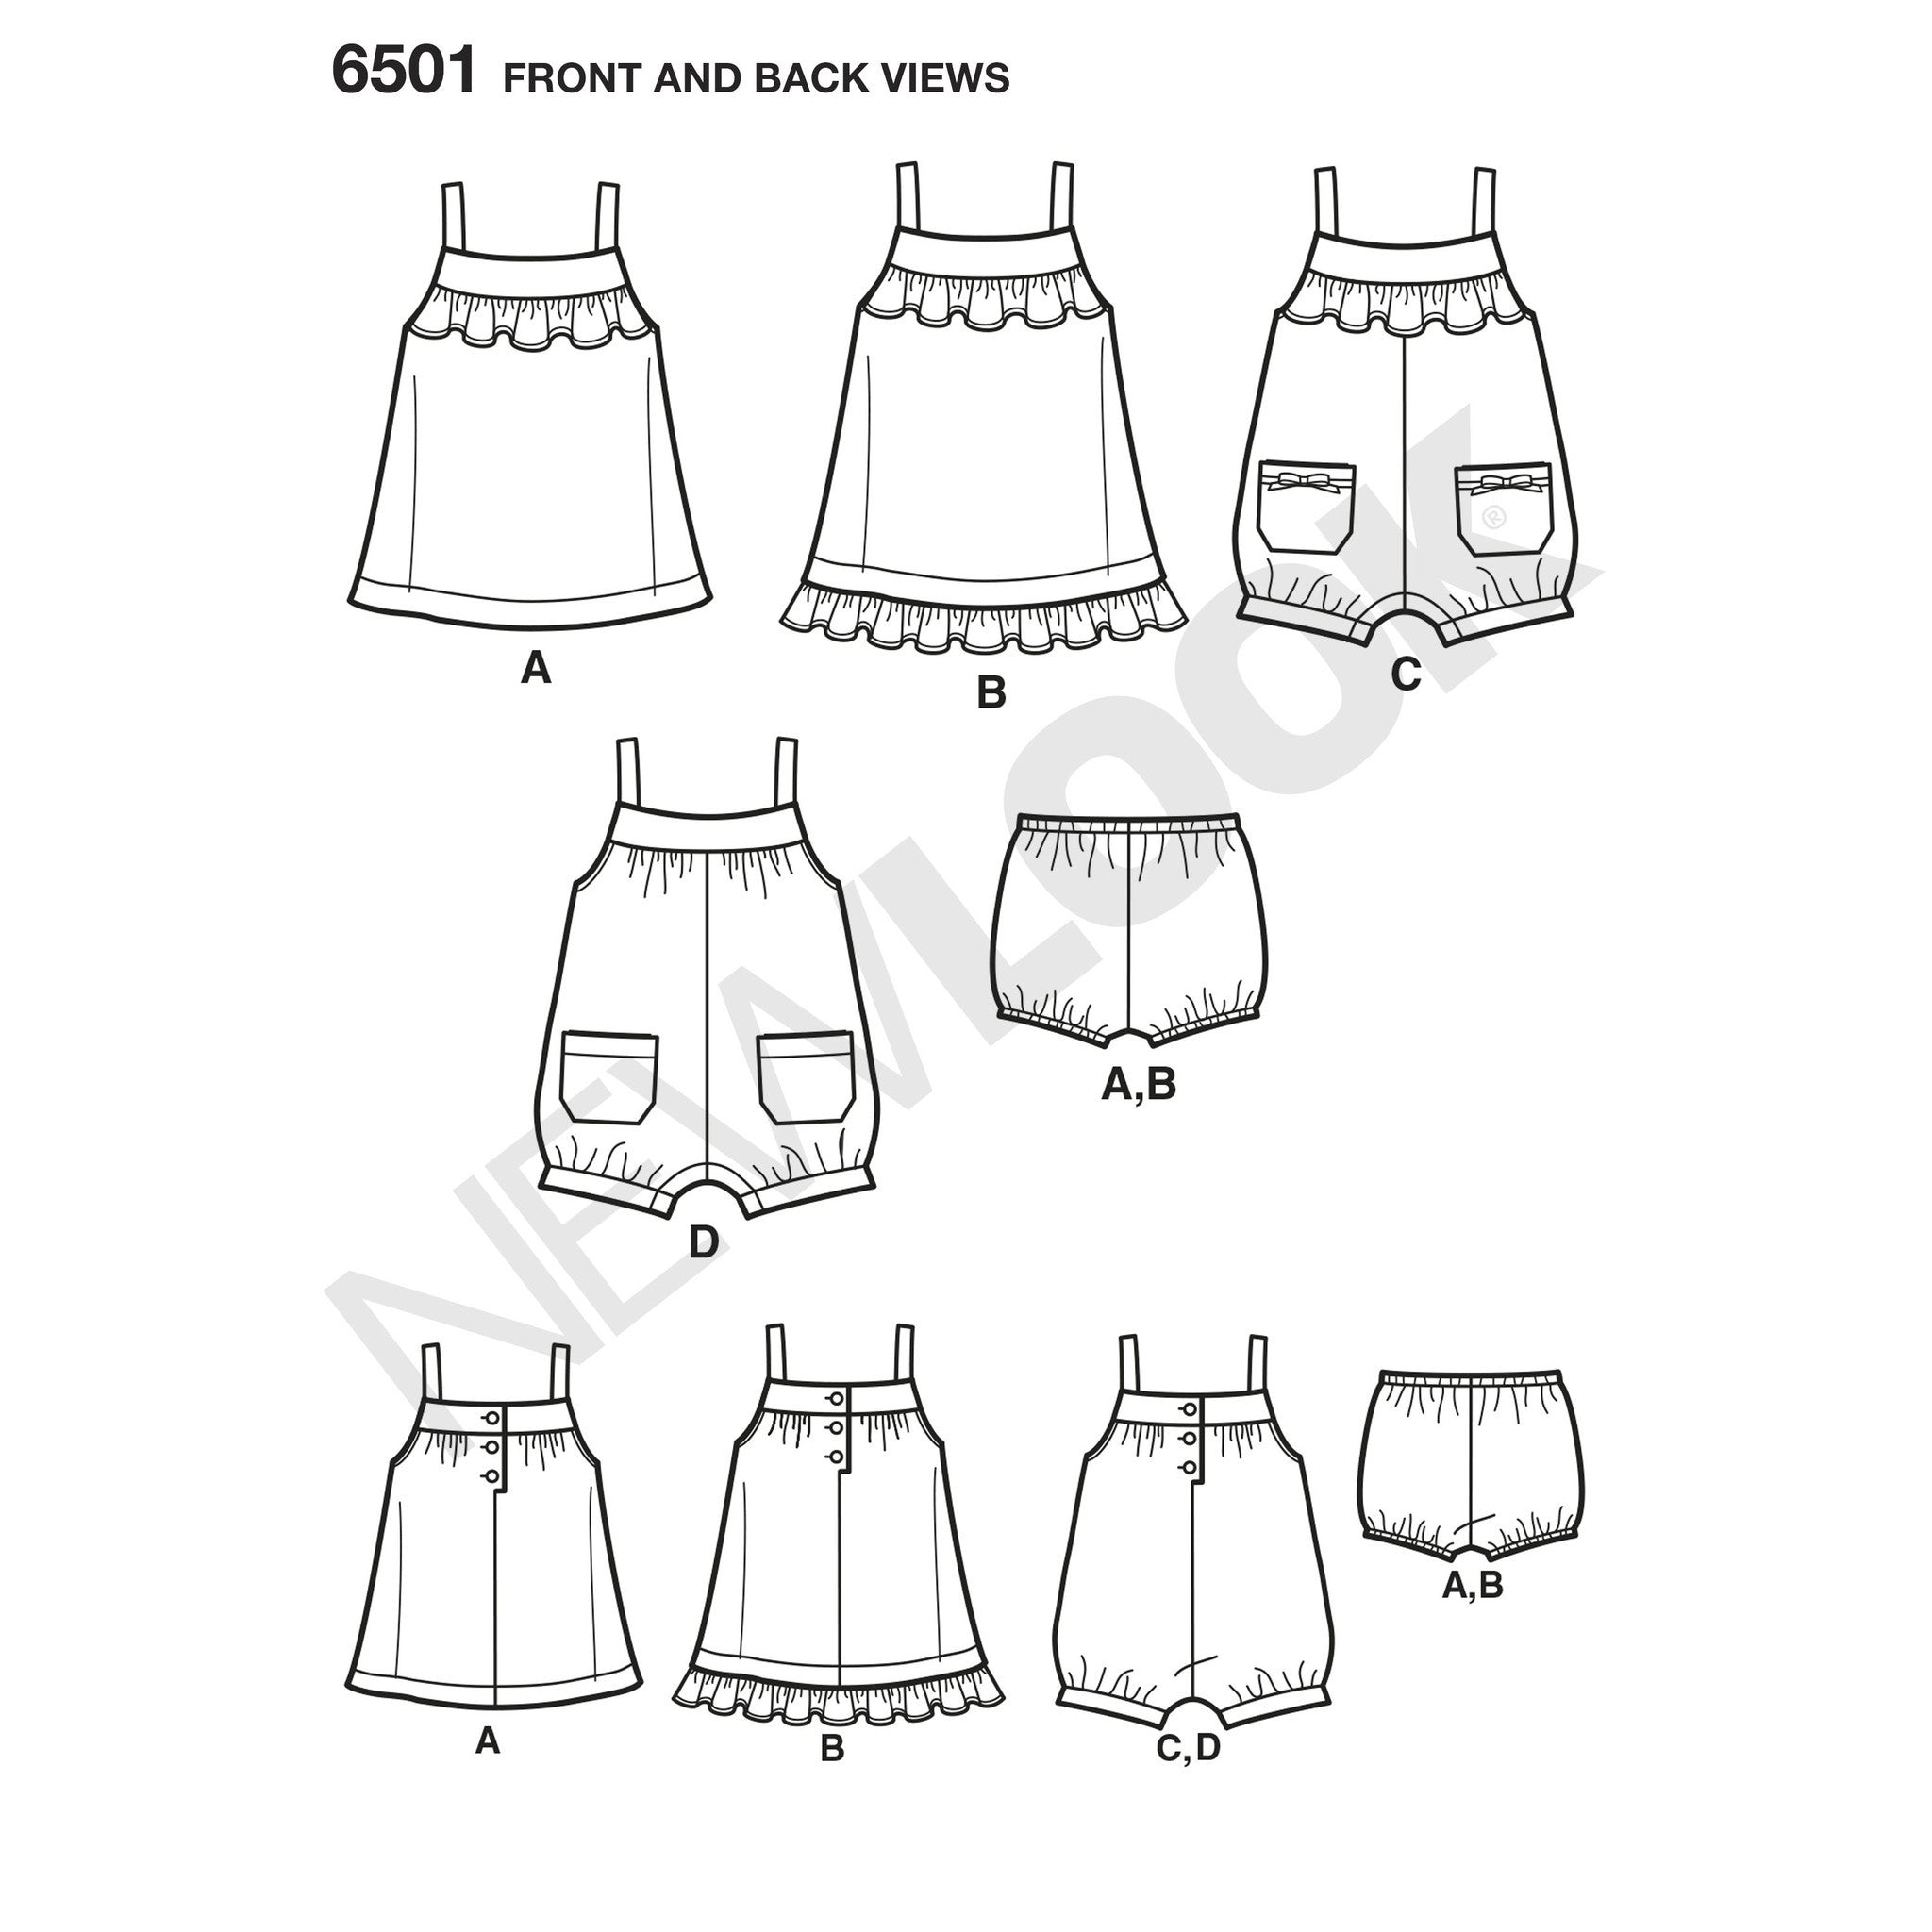 NL6501 Babies' Dress and Romper from Jaycotts Sewing Supplies